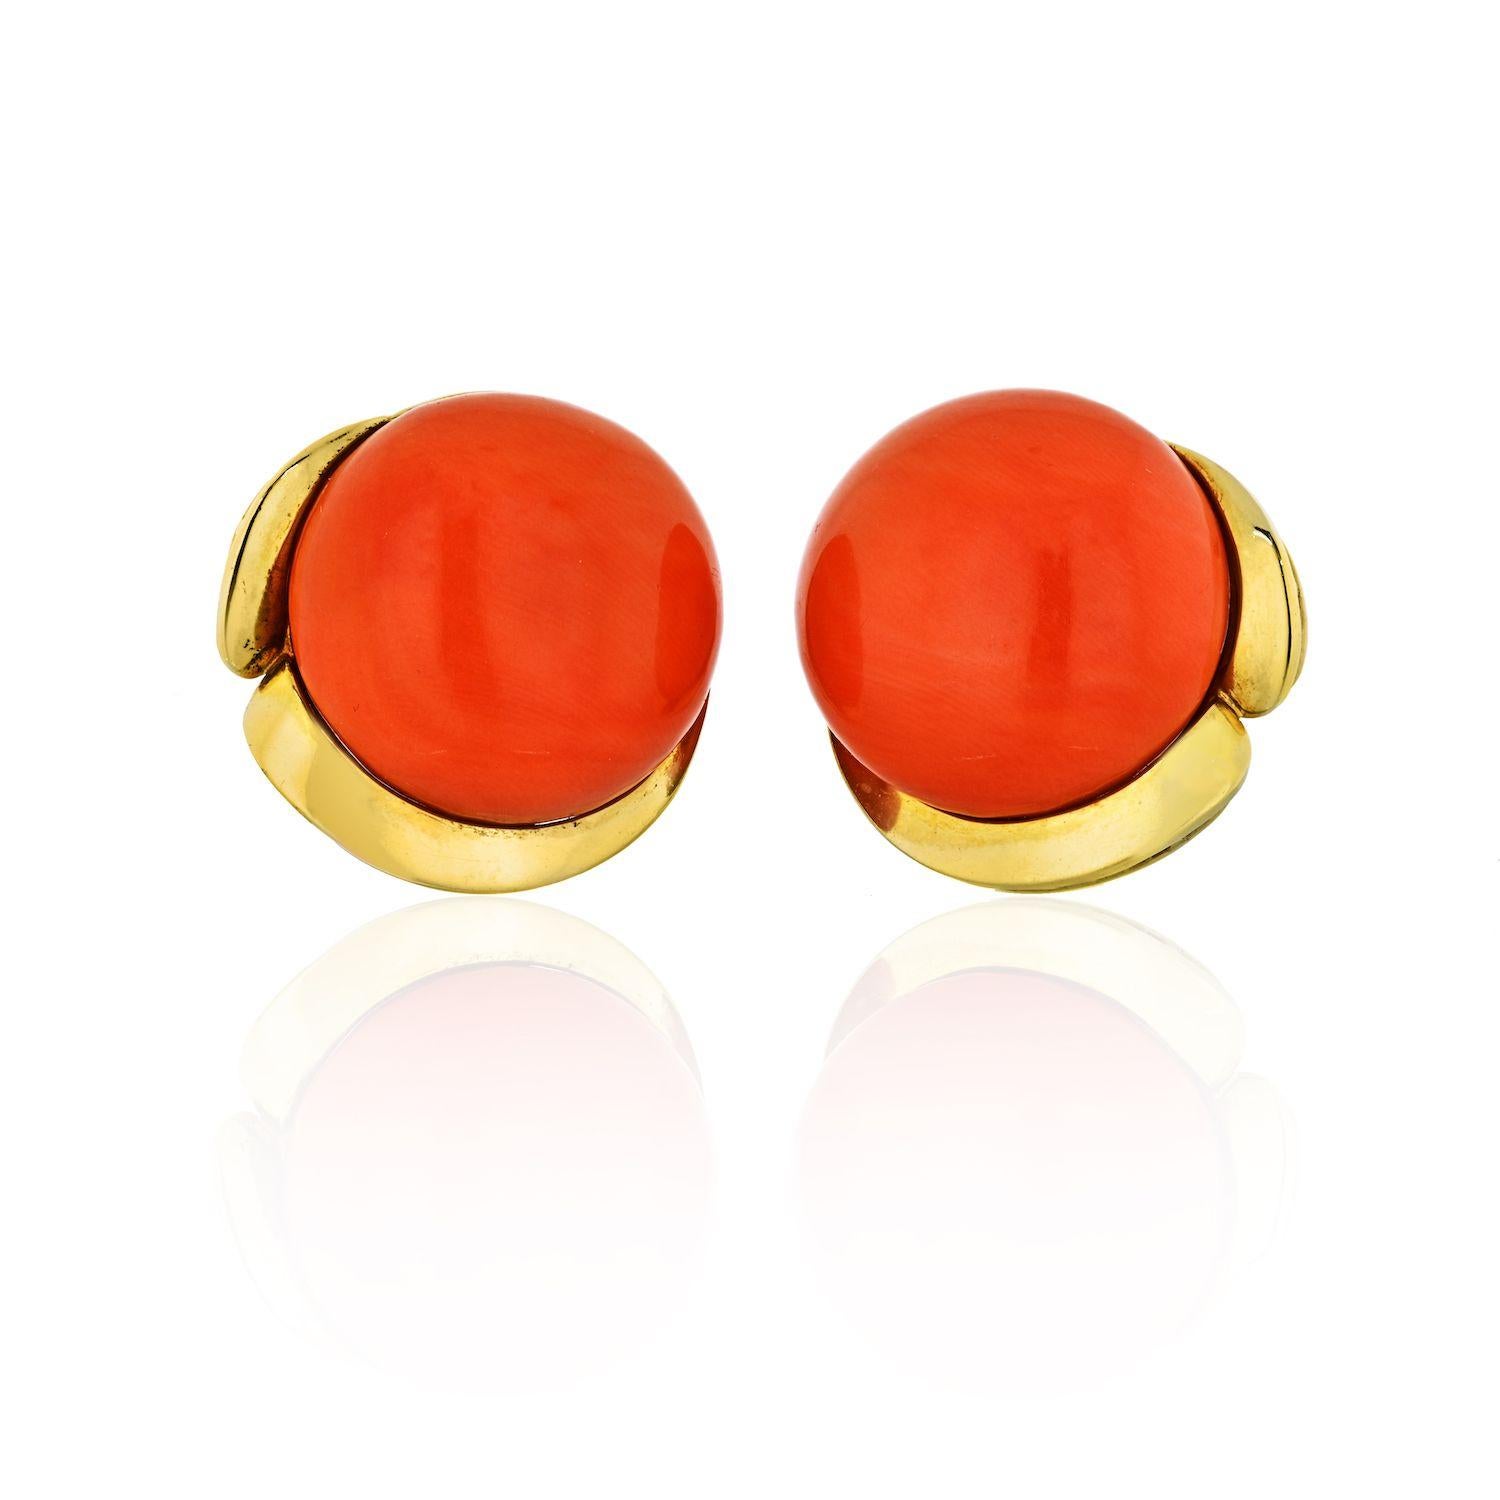 These stunning Tiffany & Co large round earrings are crafted in 18k yellow gold and feature beautiful even color cabochon orange corals measuring 22.6mm, entire earring measures 25.6mm.
Coral is of a vibrant orange color. 
These lever-back clip-on